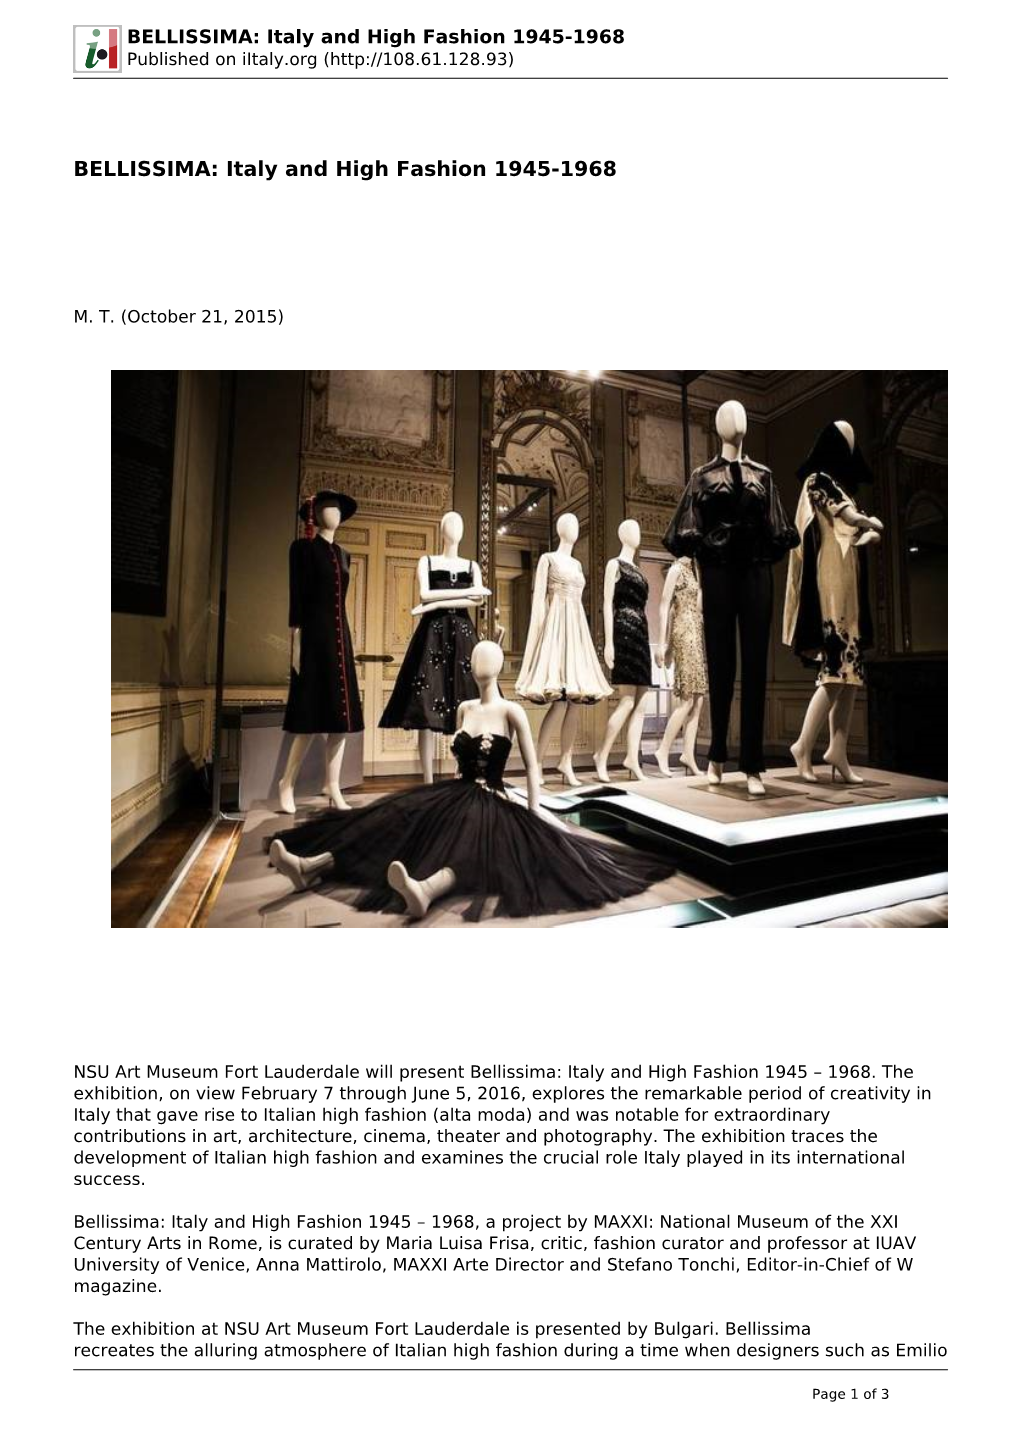 BELLISSIMA: Italy and High Fashion 1945-1968 Published on Iitaly.Org (